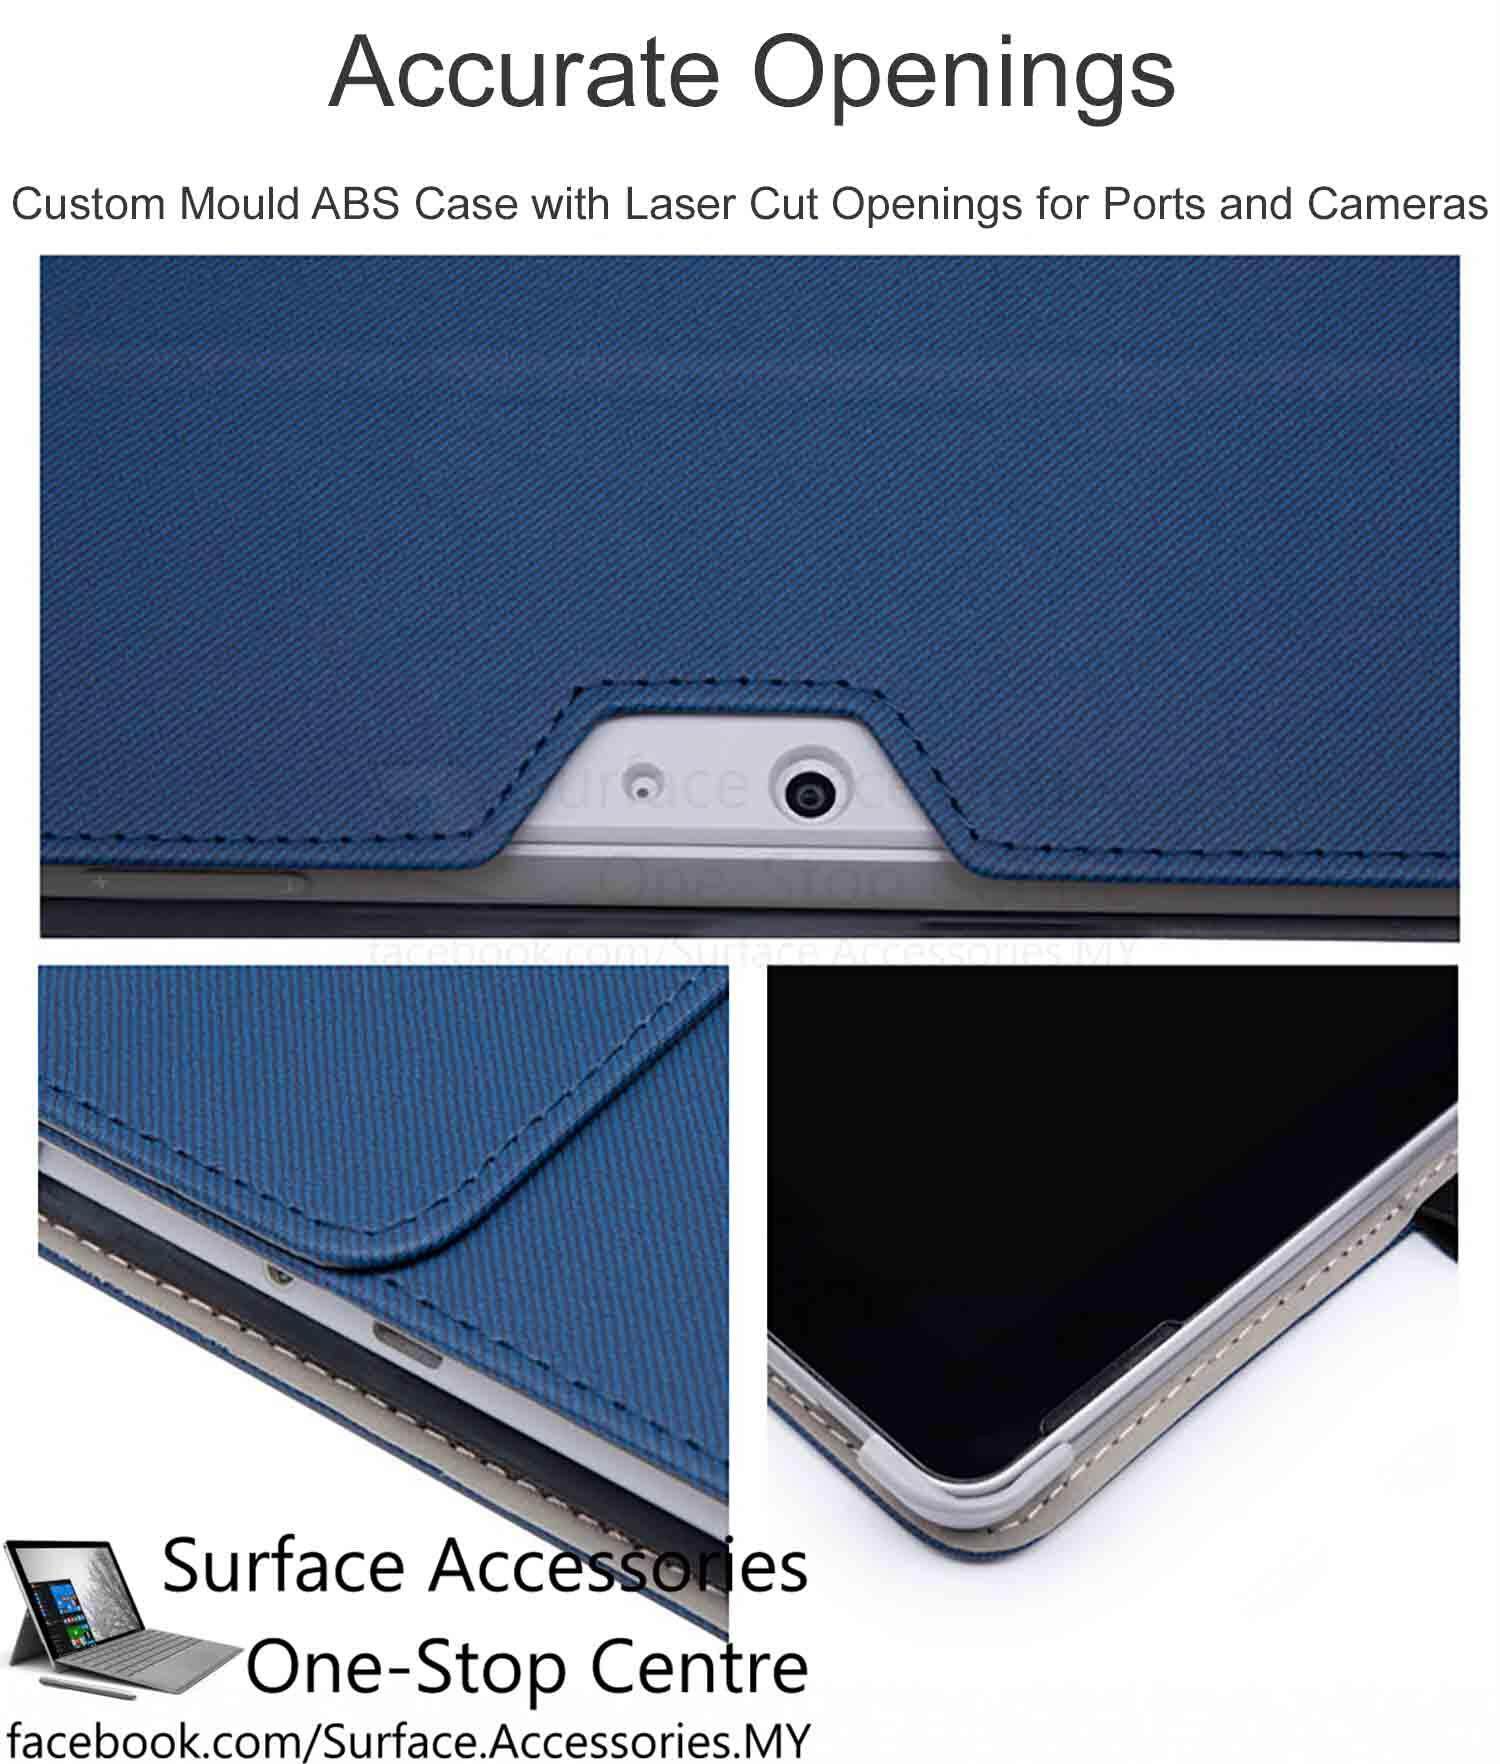 [MALAYSIA]Microsoft Surface Go 3 Casing Surface Go 2 Casing Surface Go Casing Surface Go 3 Cover Ultimate Case Stand Flip Case Pentium Gold Case Surface Go 2 Cover Ultimate Case Stand Flip Case Pentium Gold Case Surface Go Cover Ultimate Case Stand